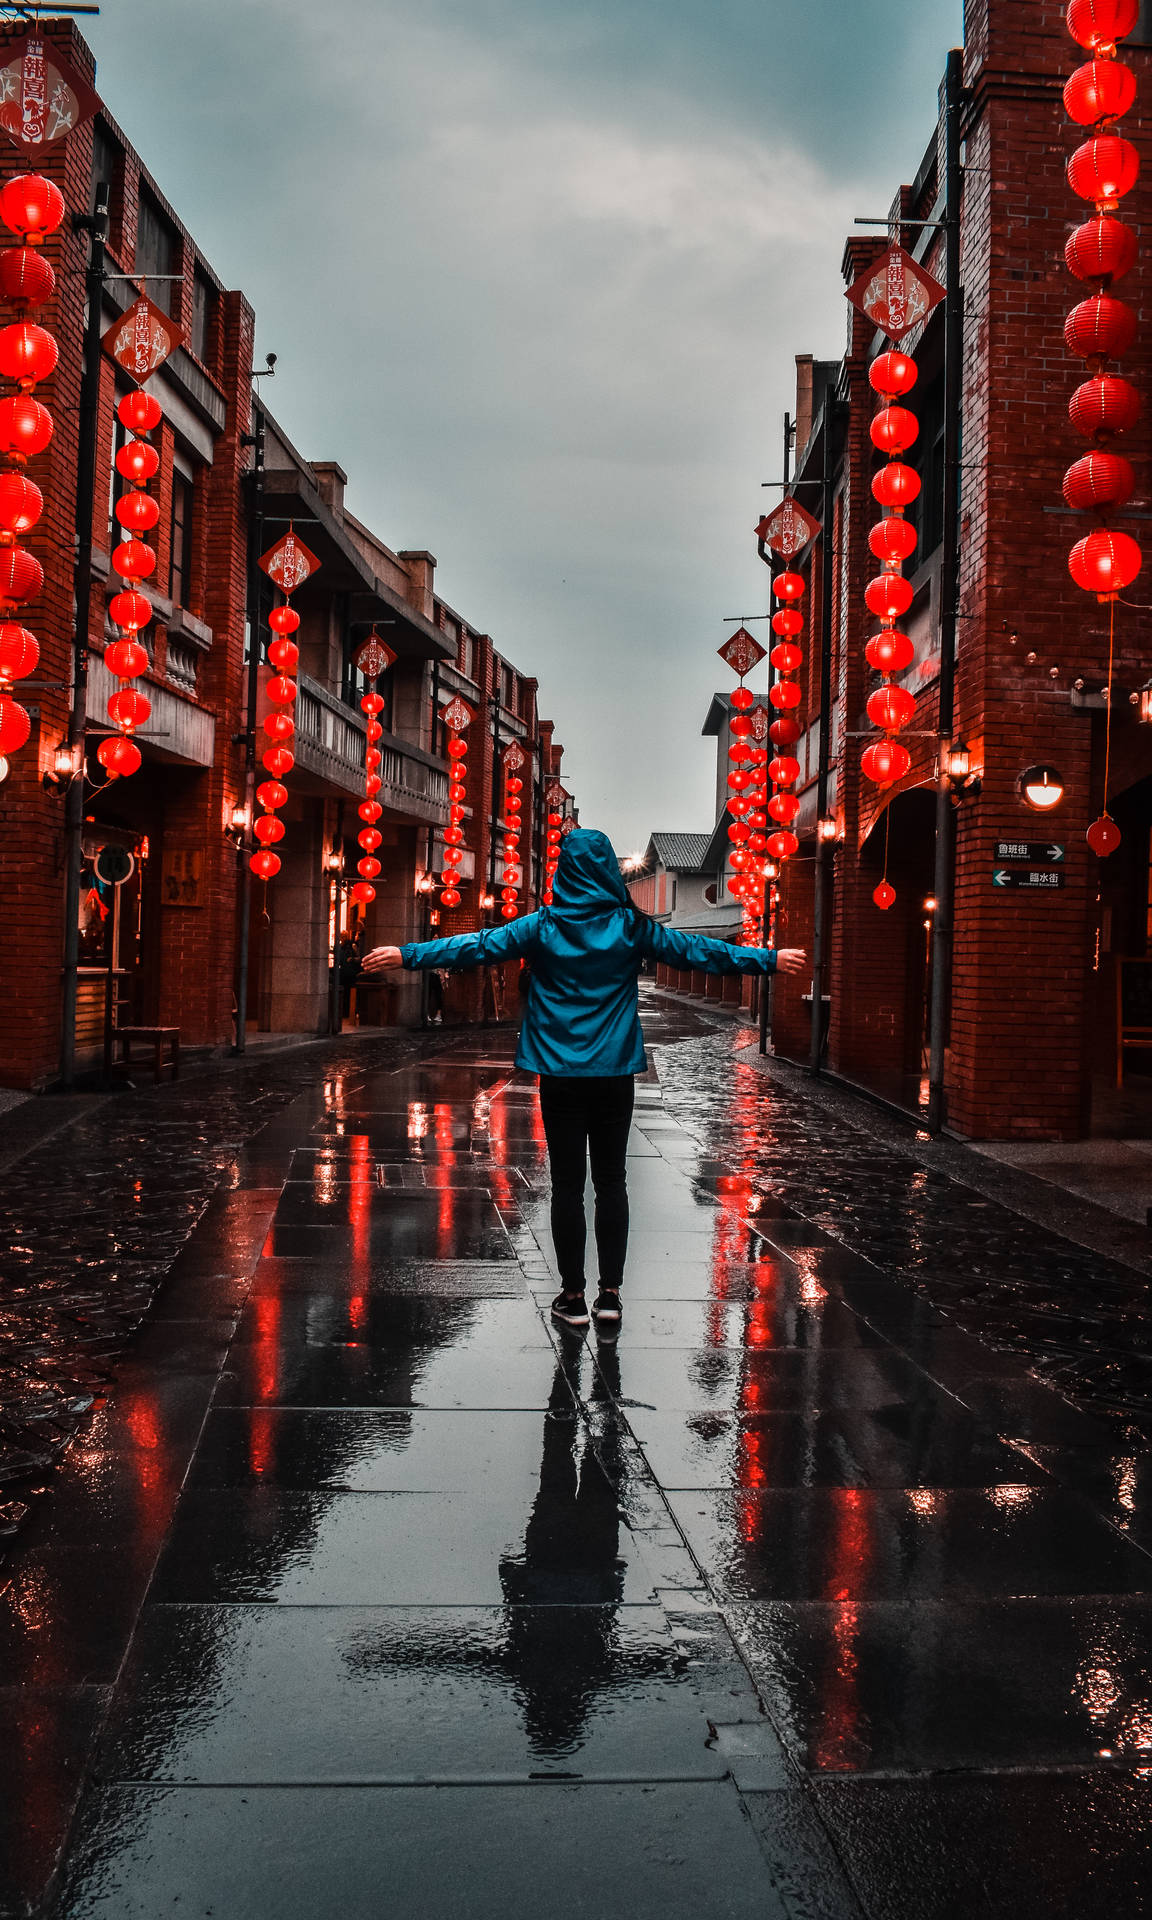 Girl In Chinese Street